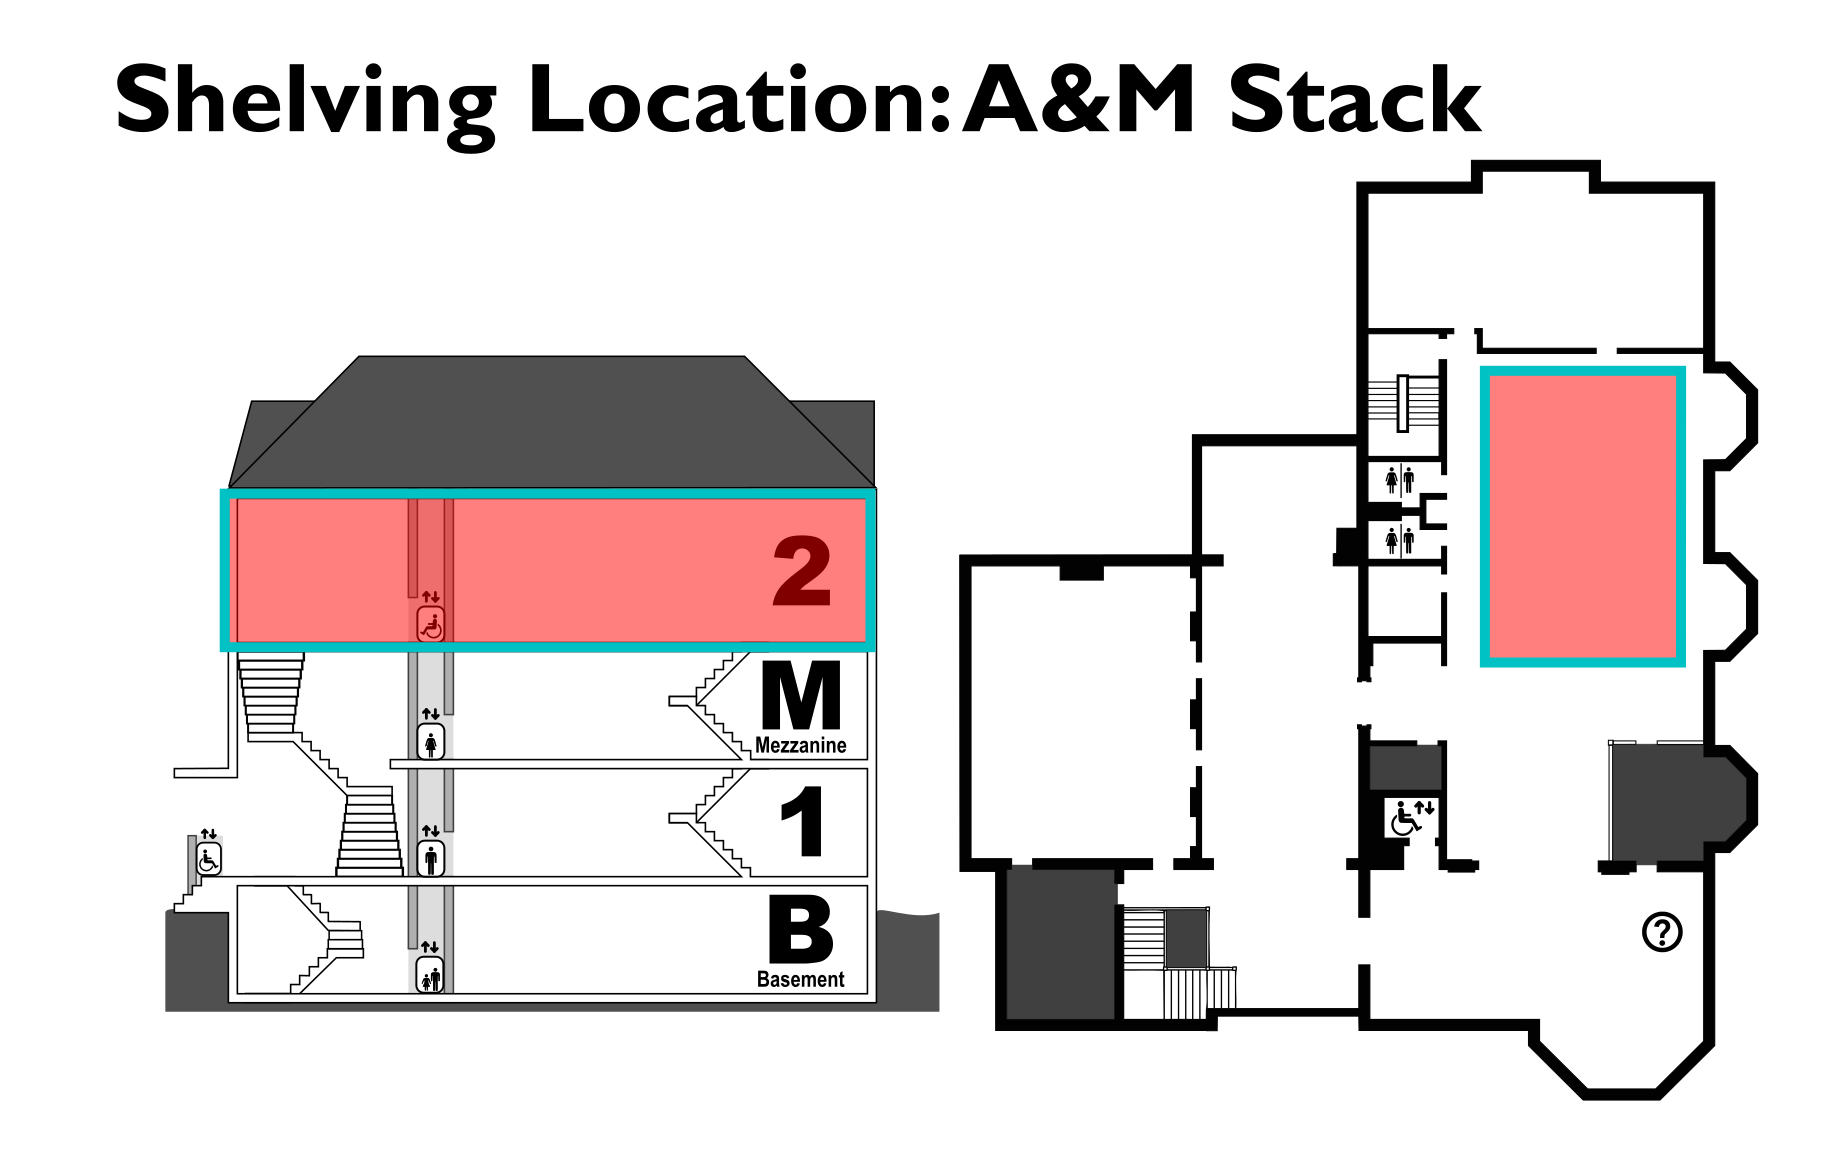 map showing the location of the A&M Stack shelving location